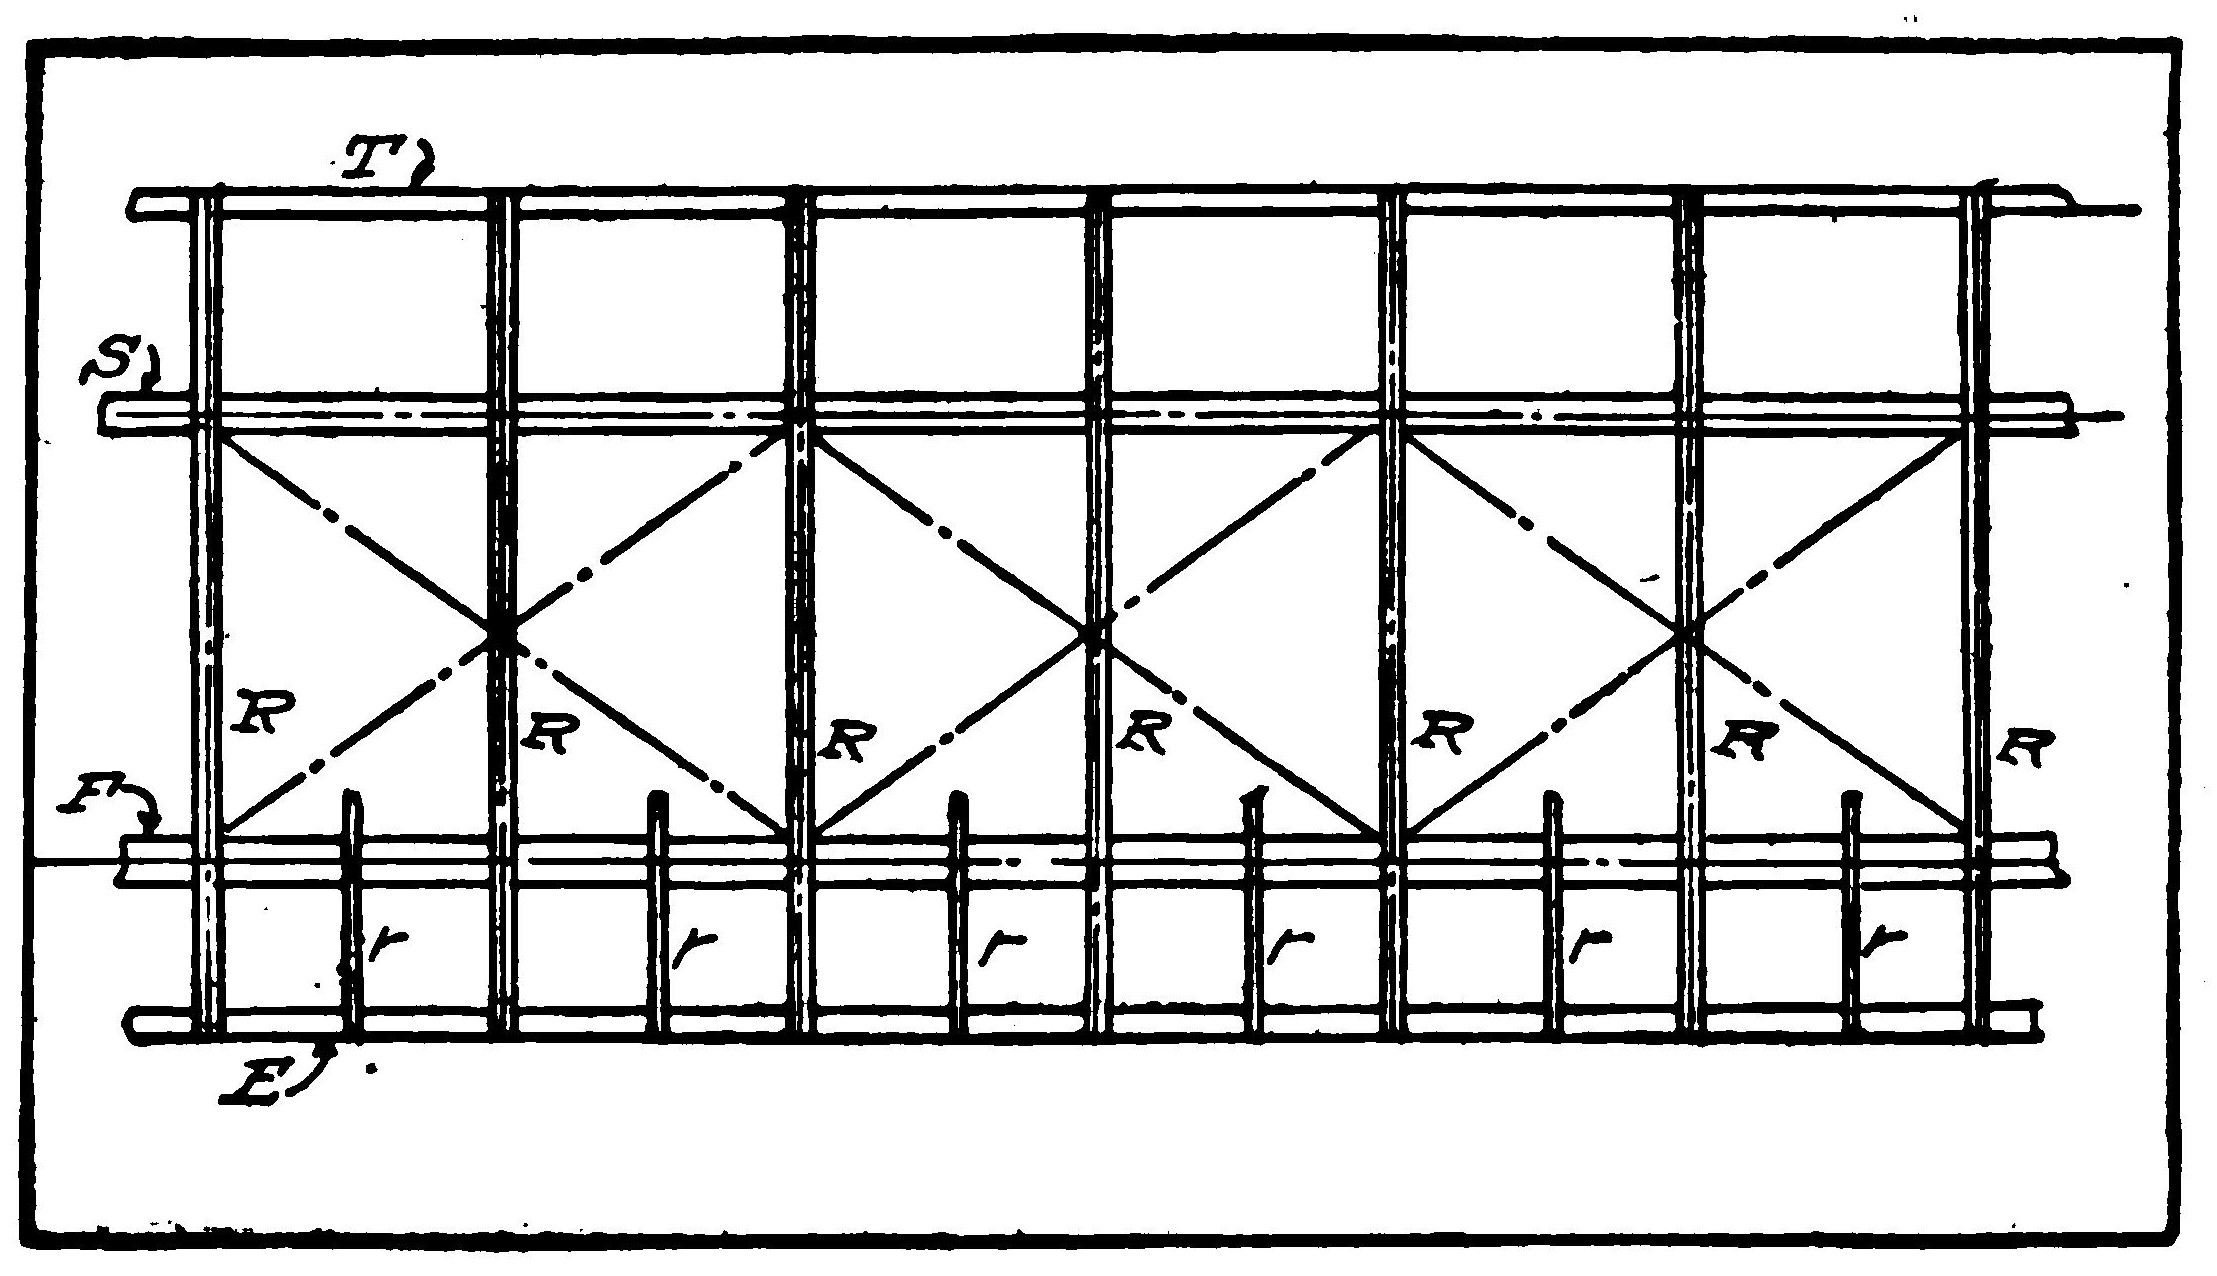 Fig. 3. Sub-Rib Construction, the Sub-Ribs (r) Are Placed at the Entering Edge.